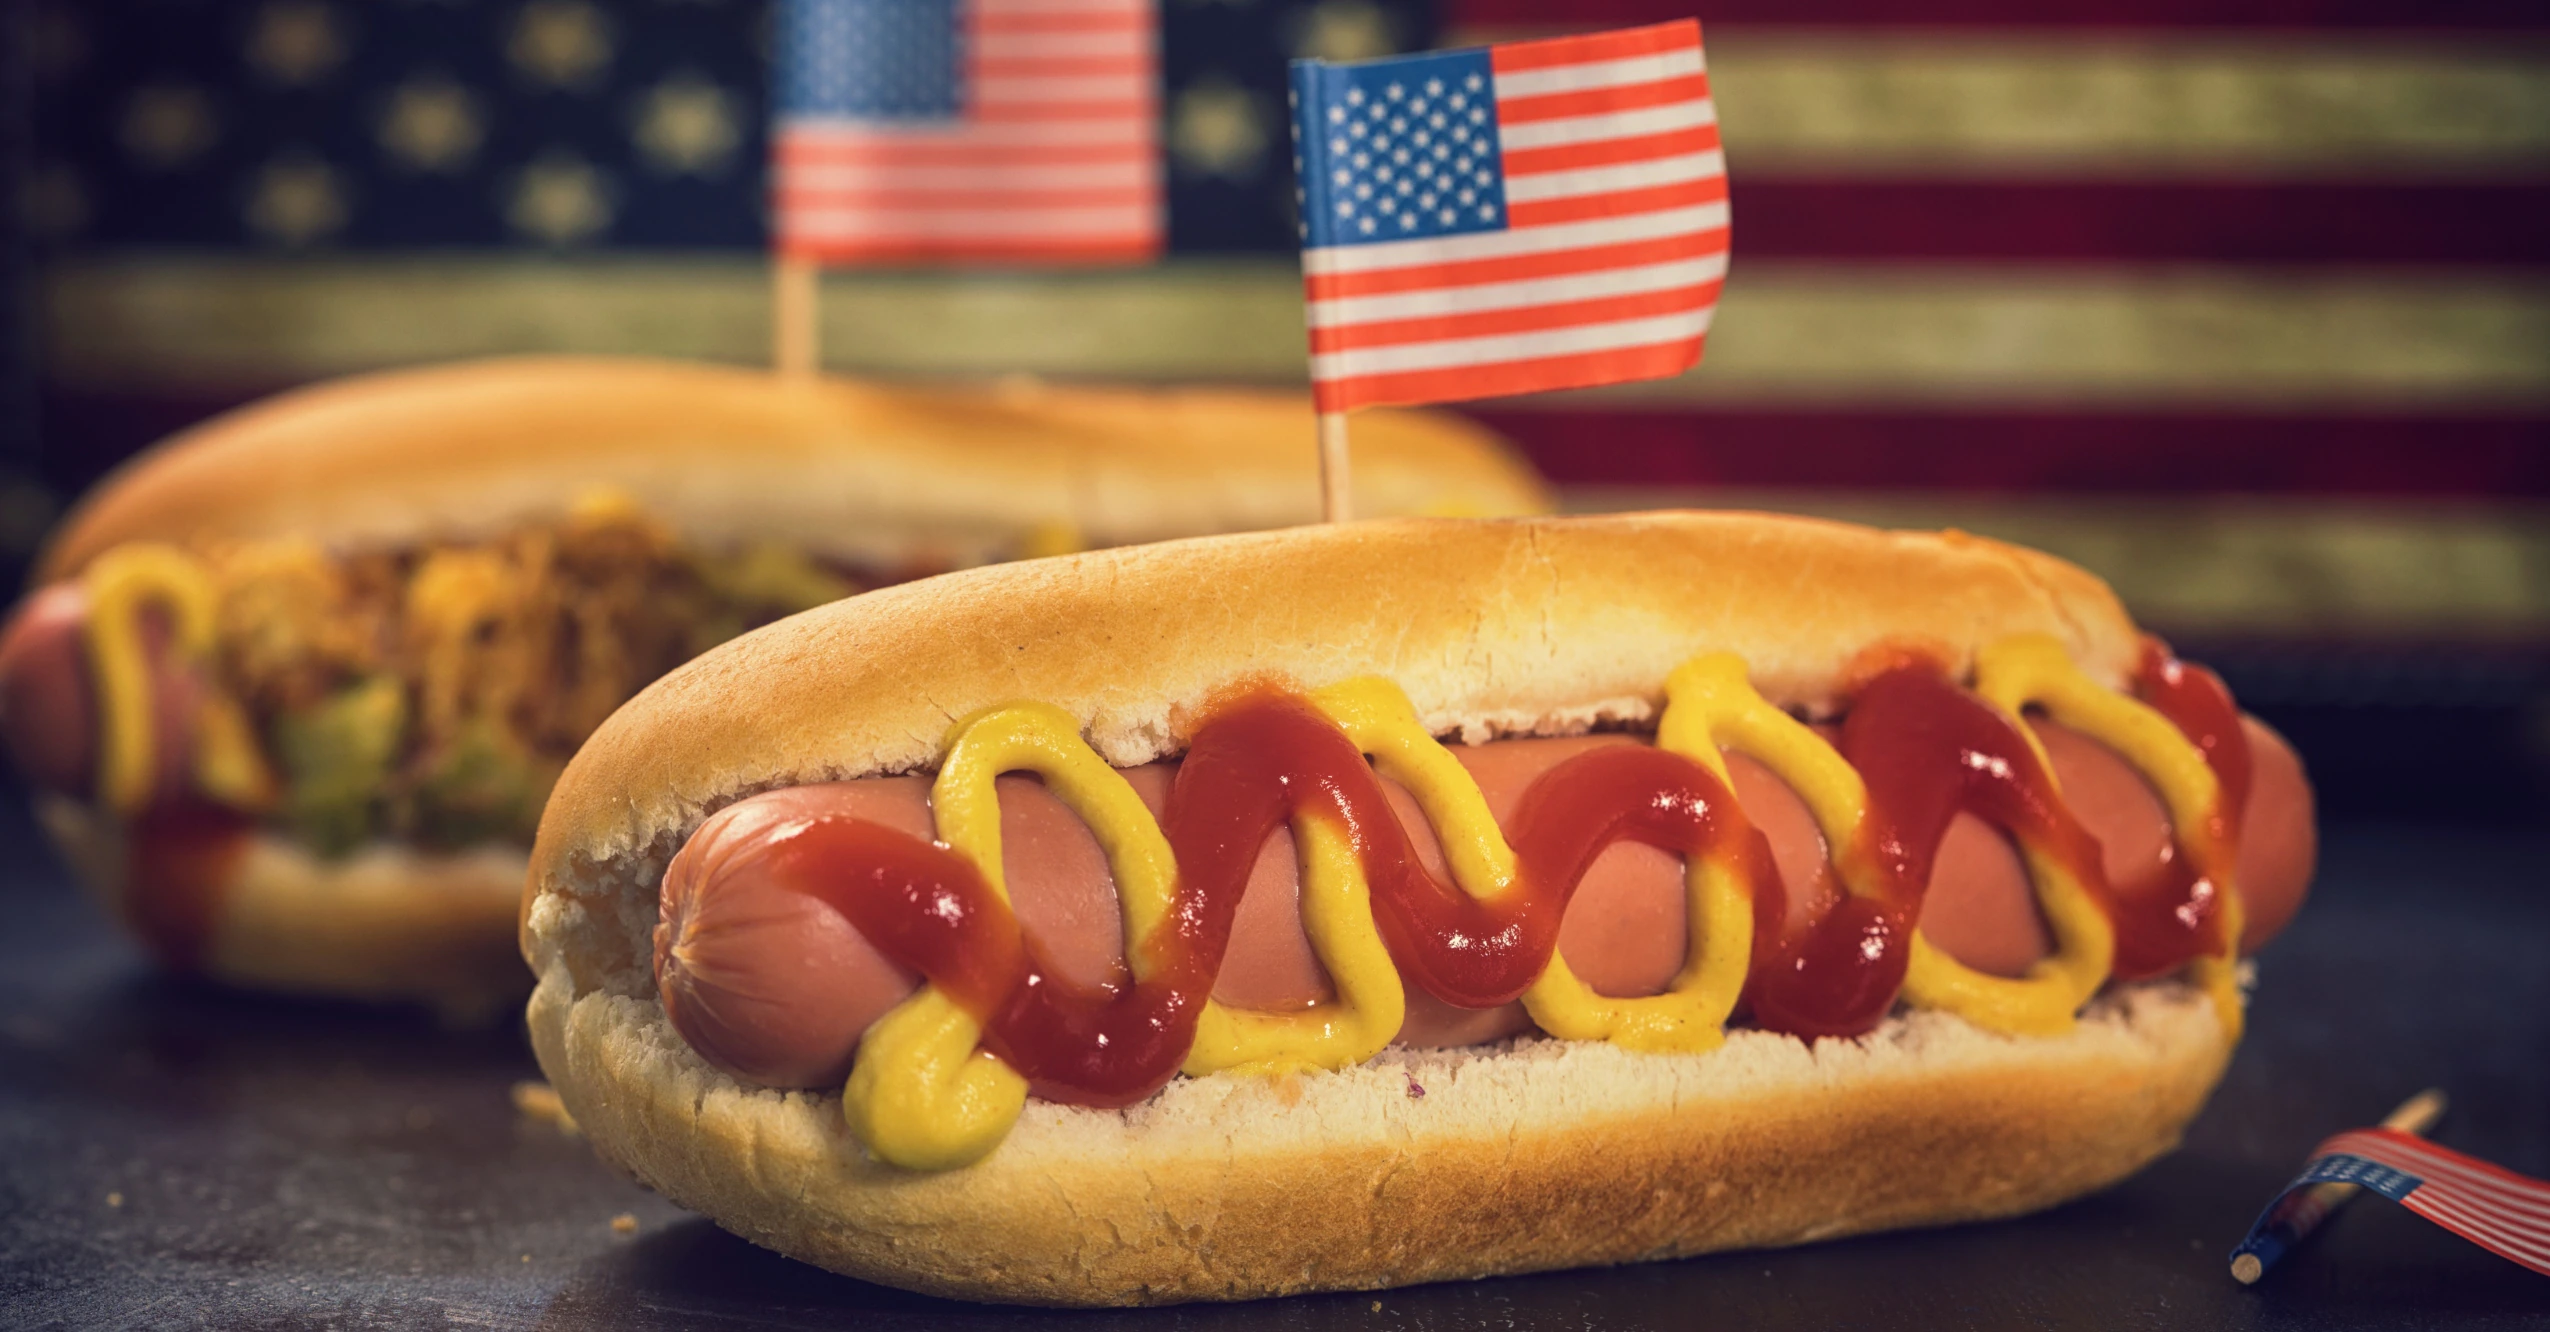 Win $50,000 With MaximBet’s Free-To-Play July 4th ‘Sausage Party’ Contest